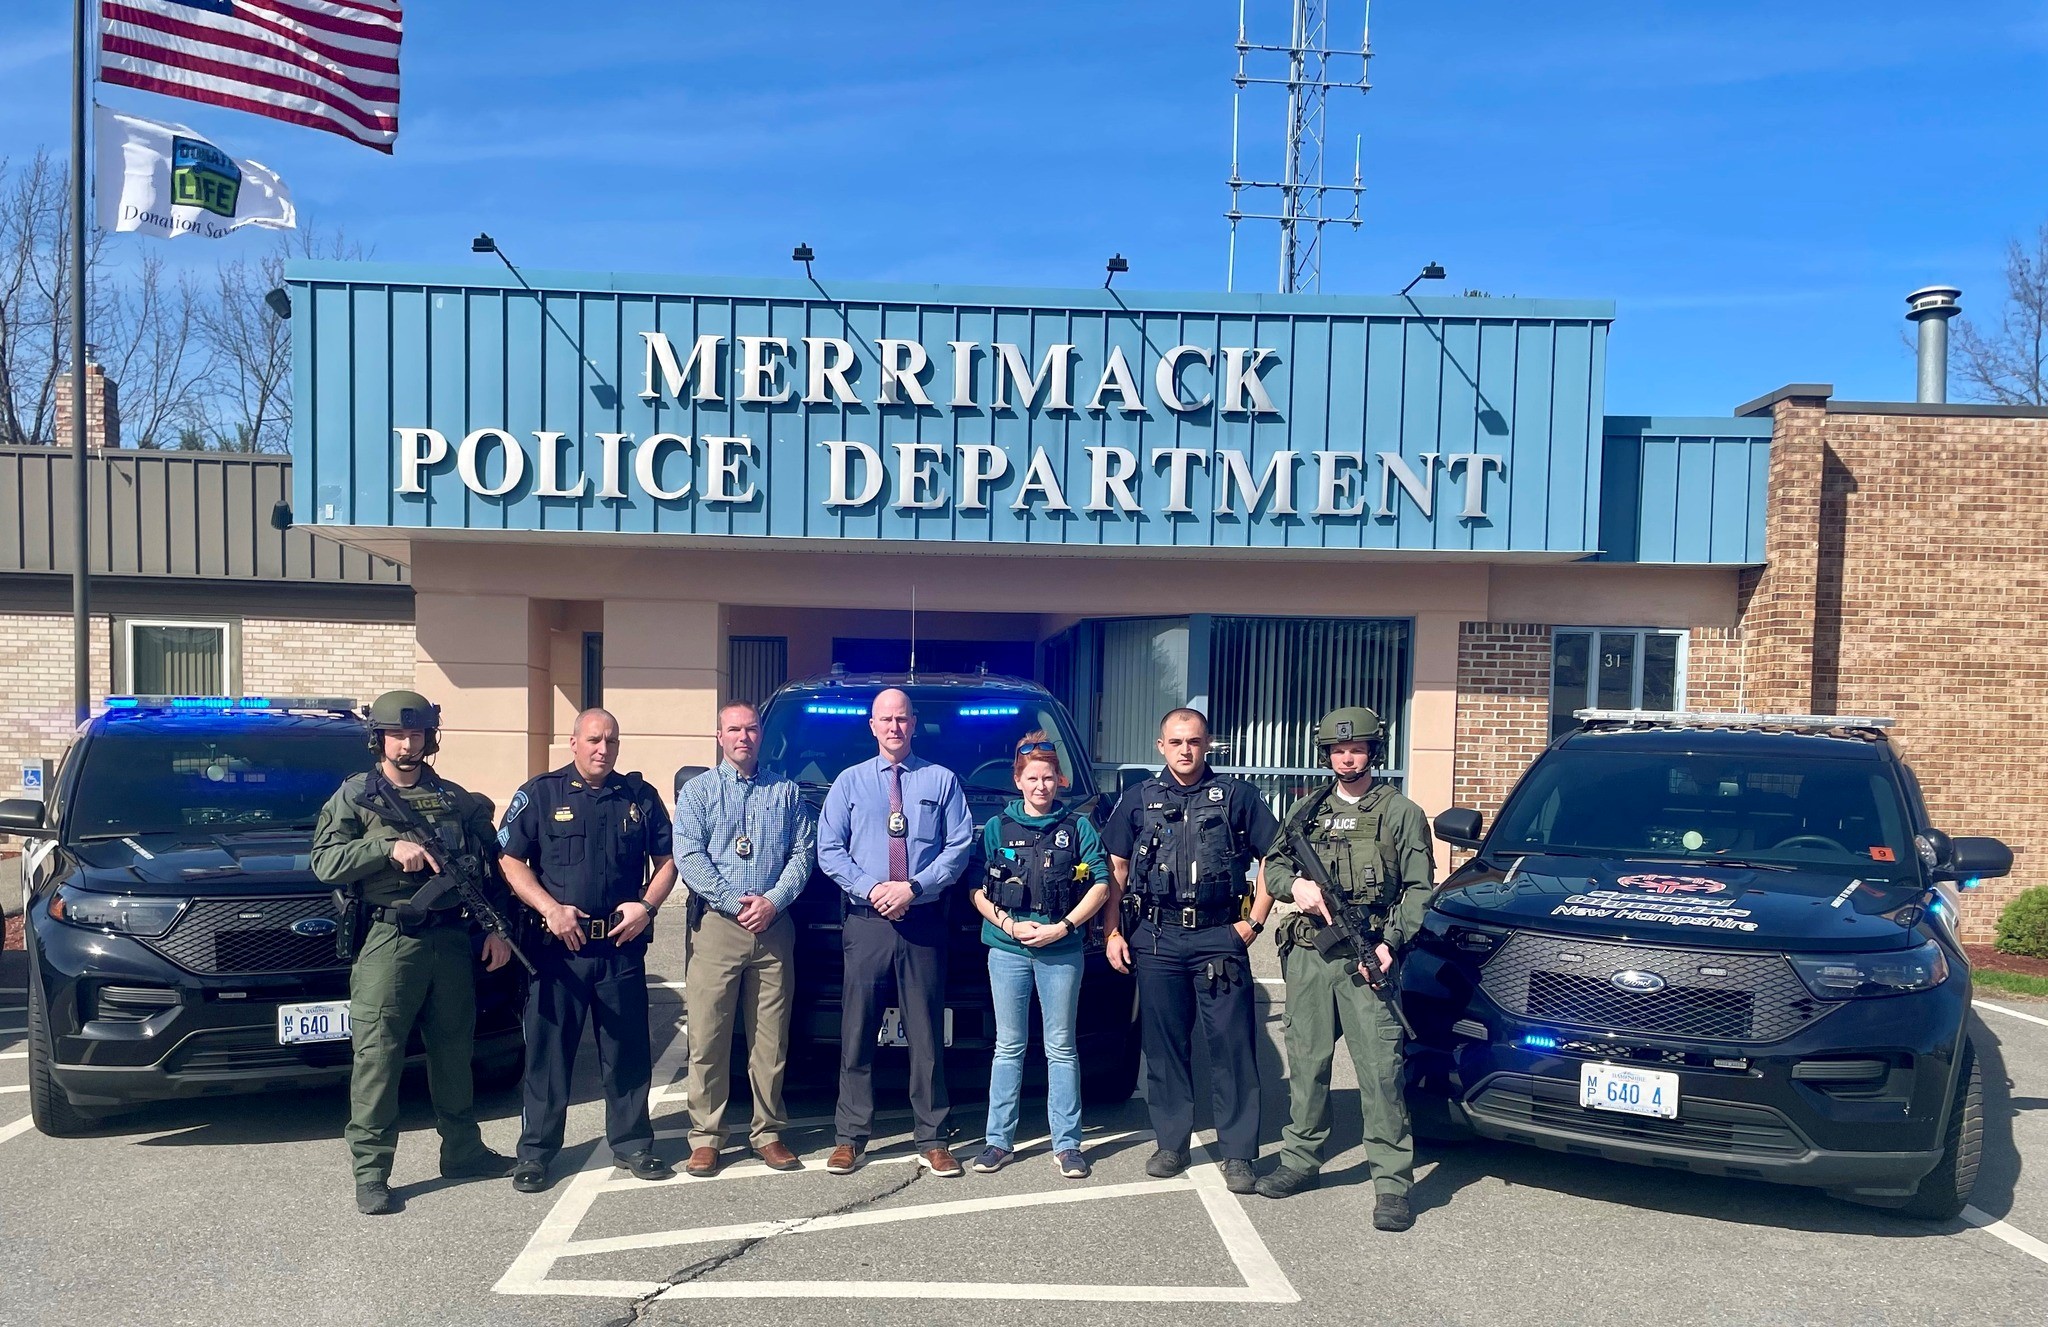 Merrimack Police Department, NH Public Safety Jobs